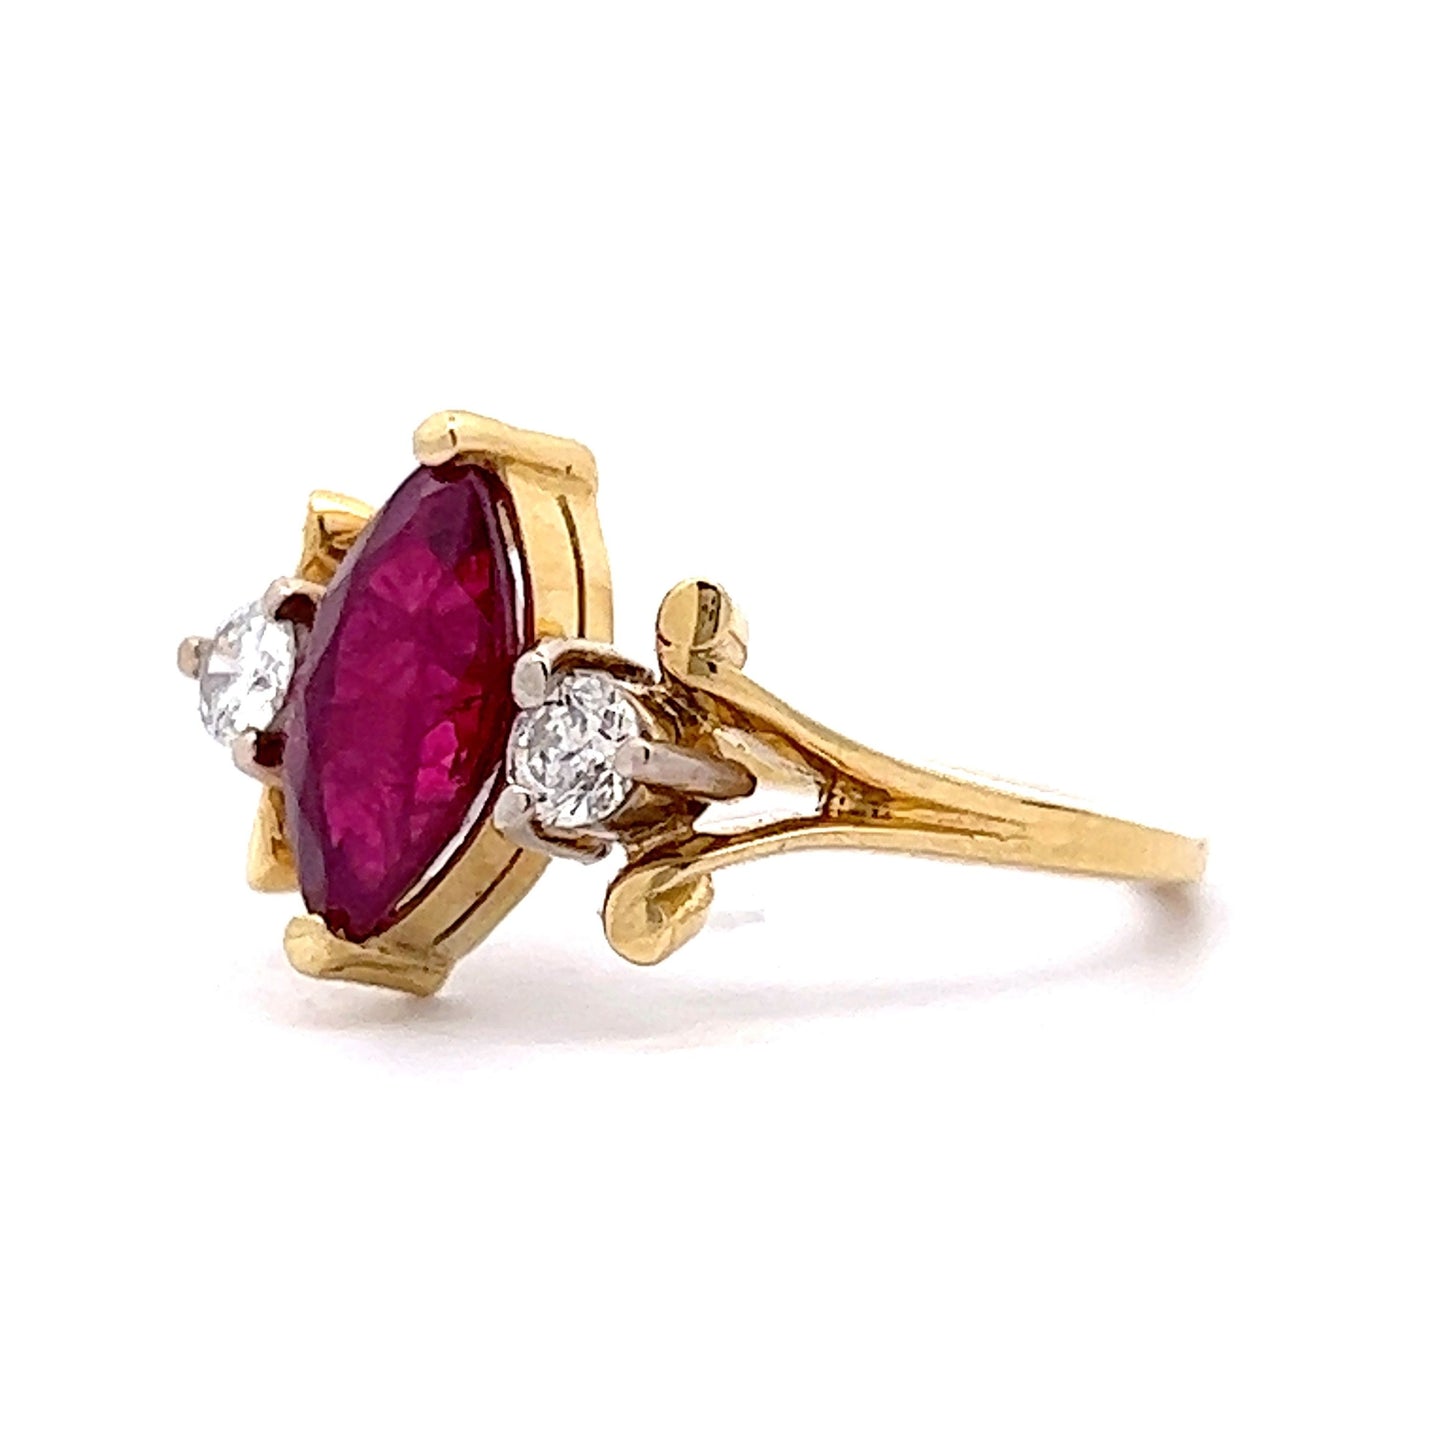 Marquise Cut Ruby Engagement Ring in 18k Yellow Gold